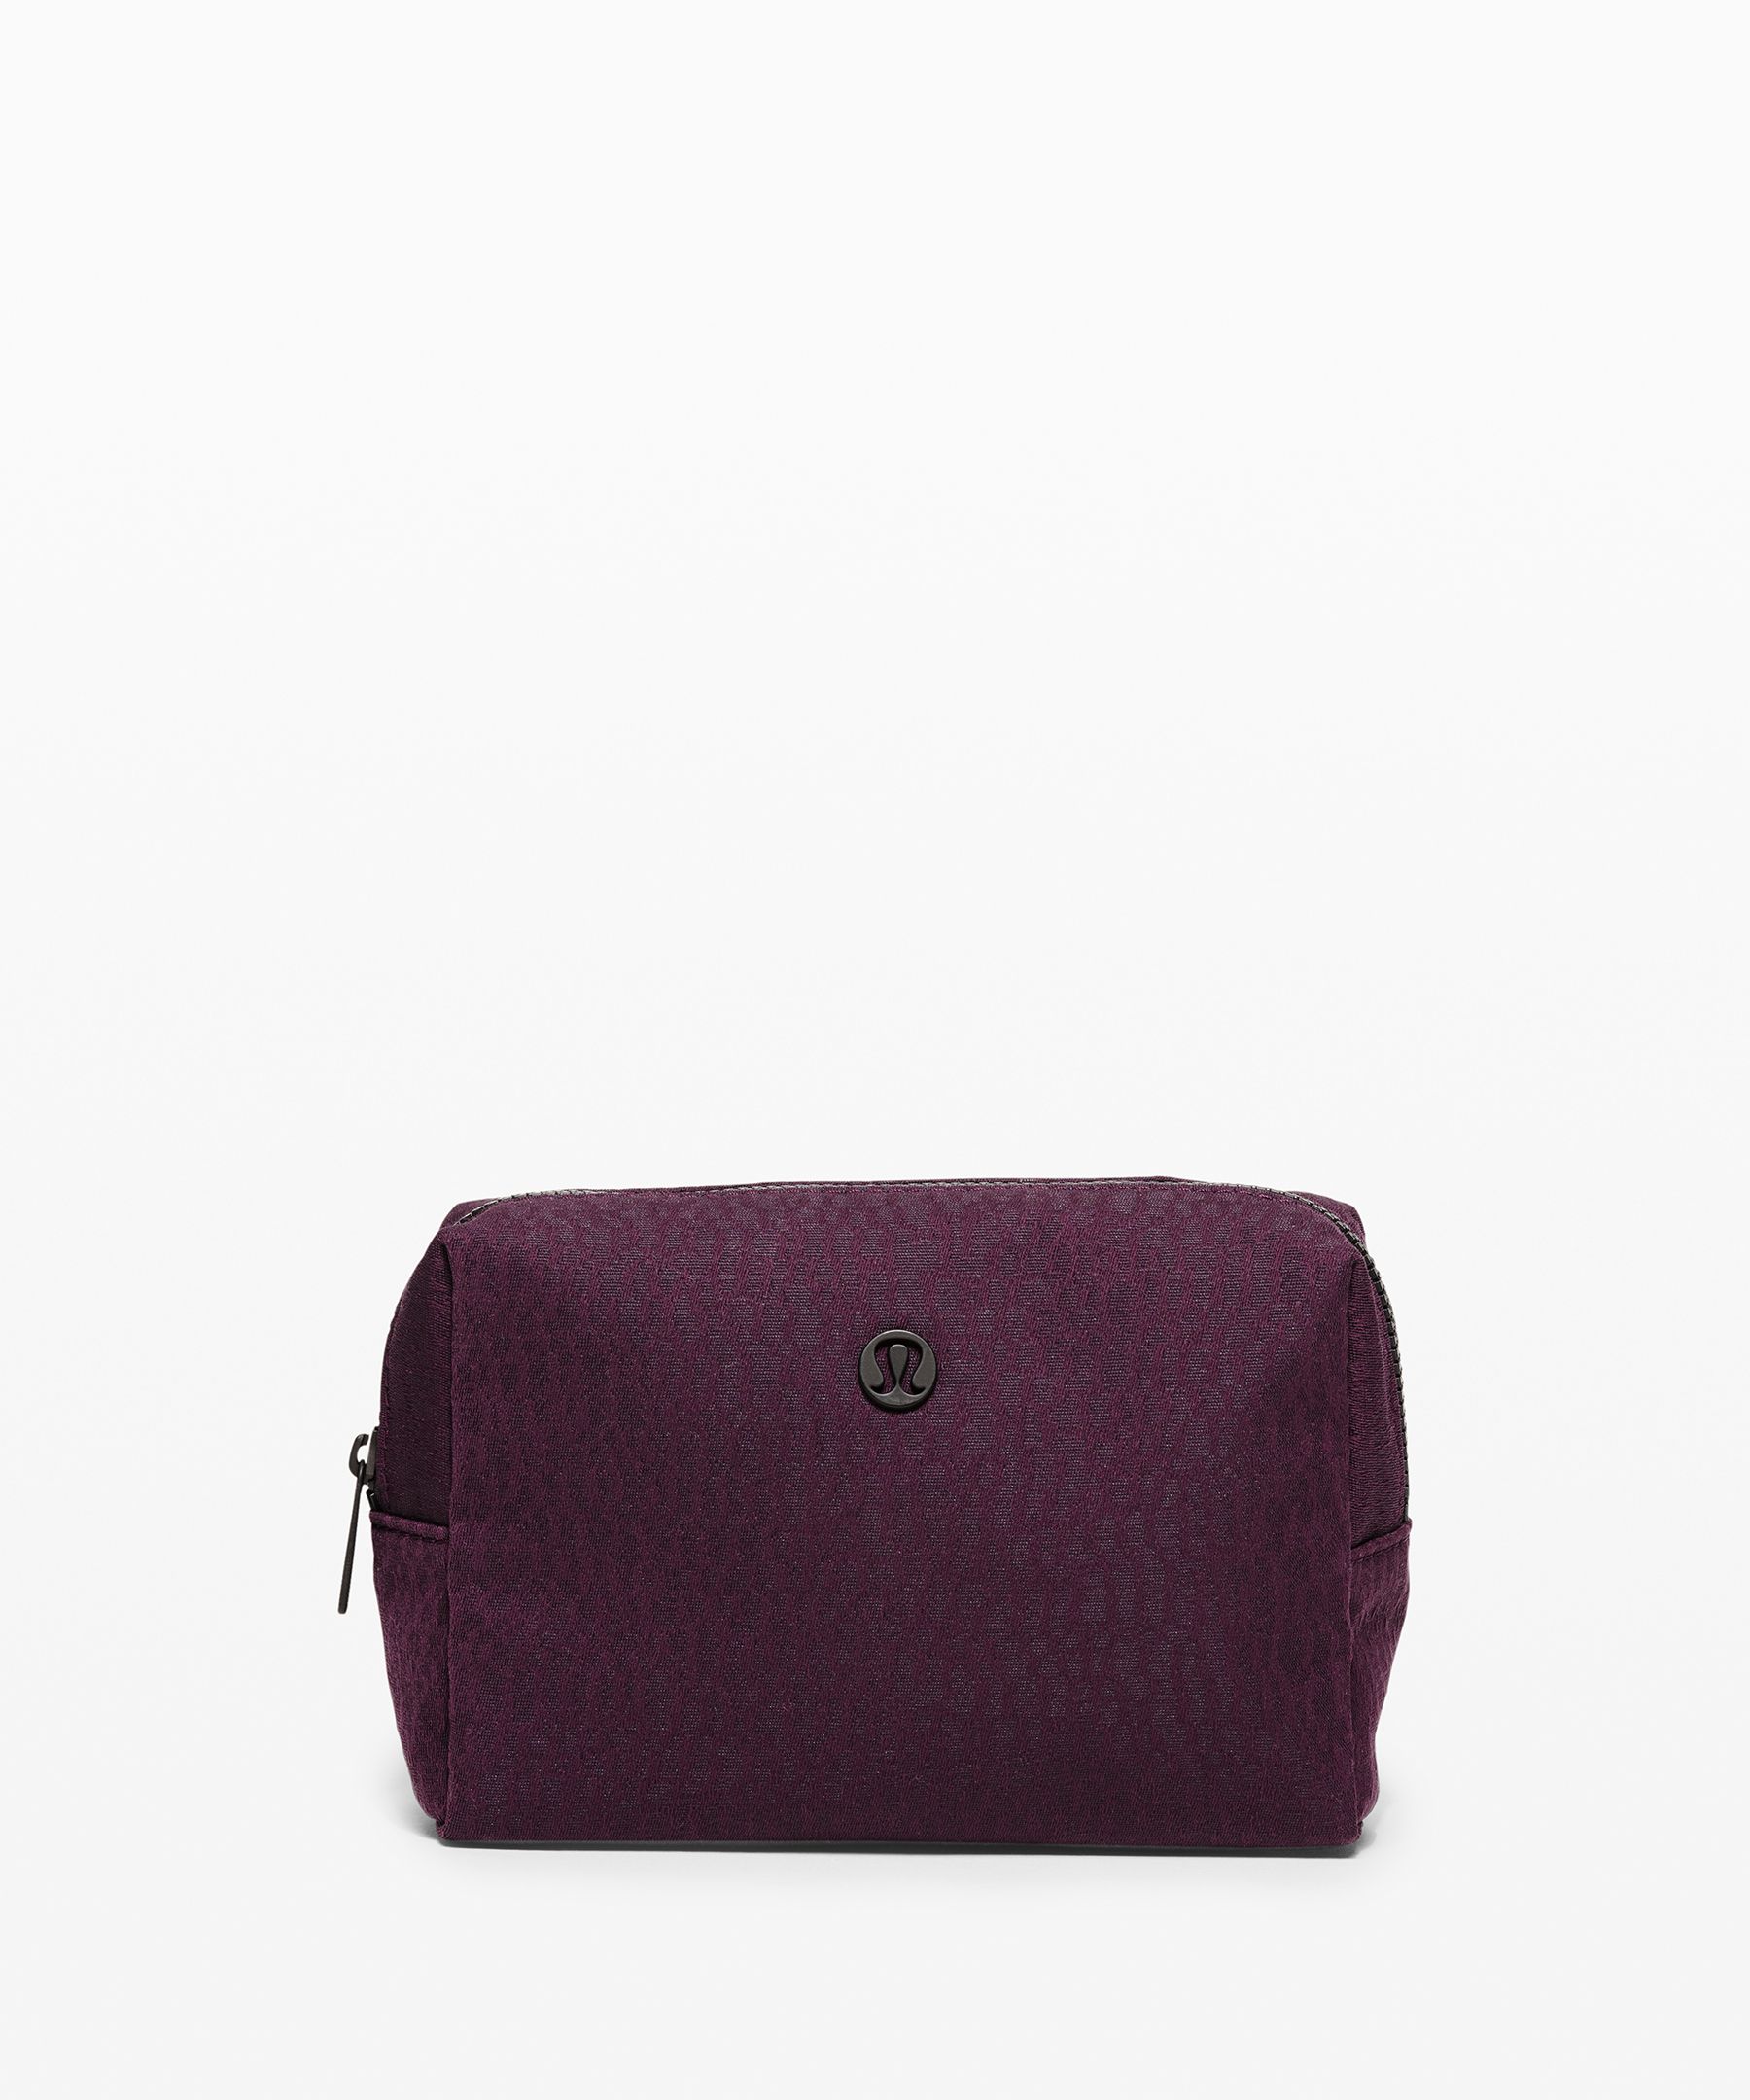 Lululemon All Your Small Things Pouch *mini 2l In Stacked Jacquard Black Cherry Nocturnal